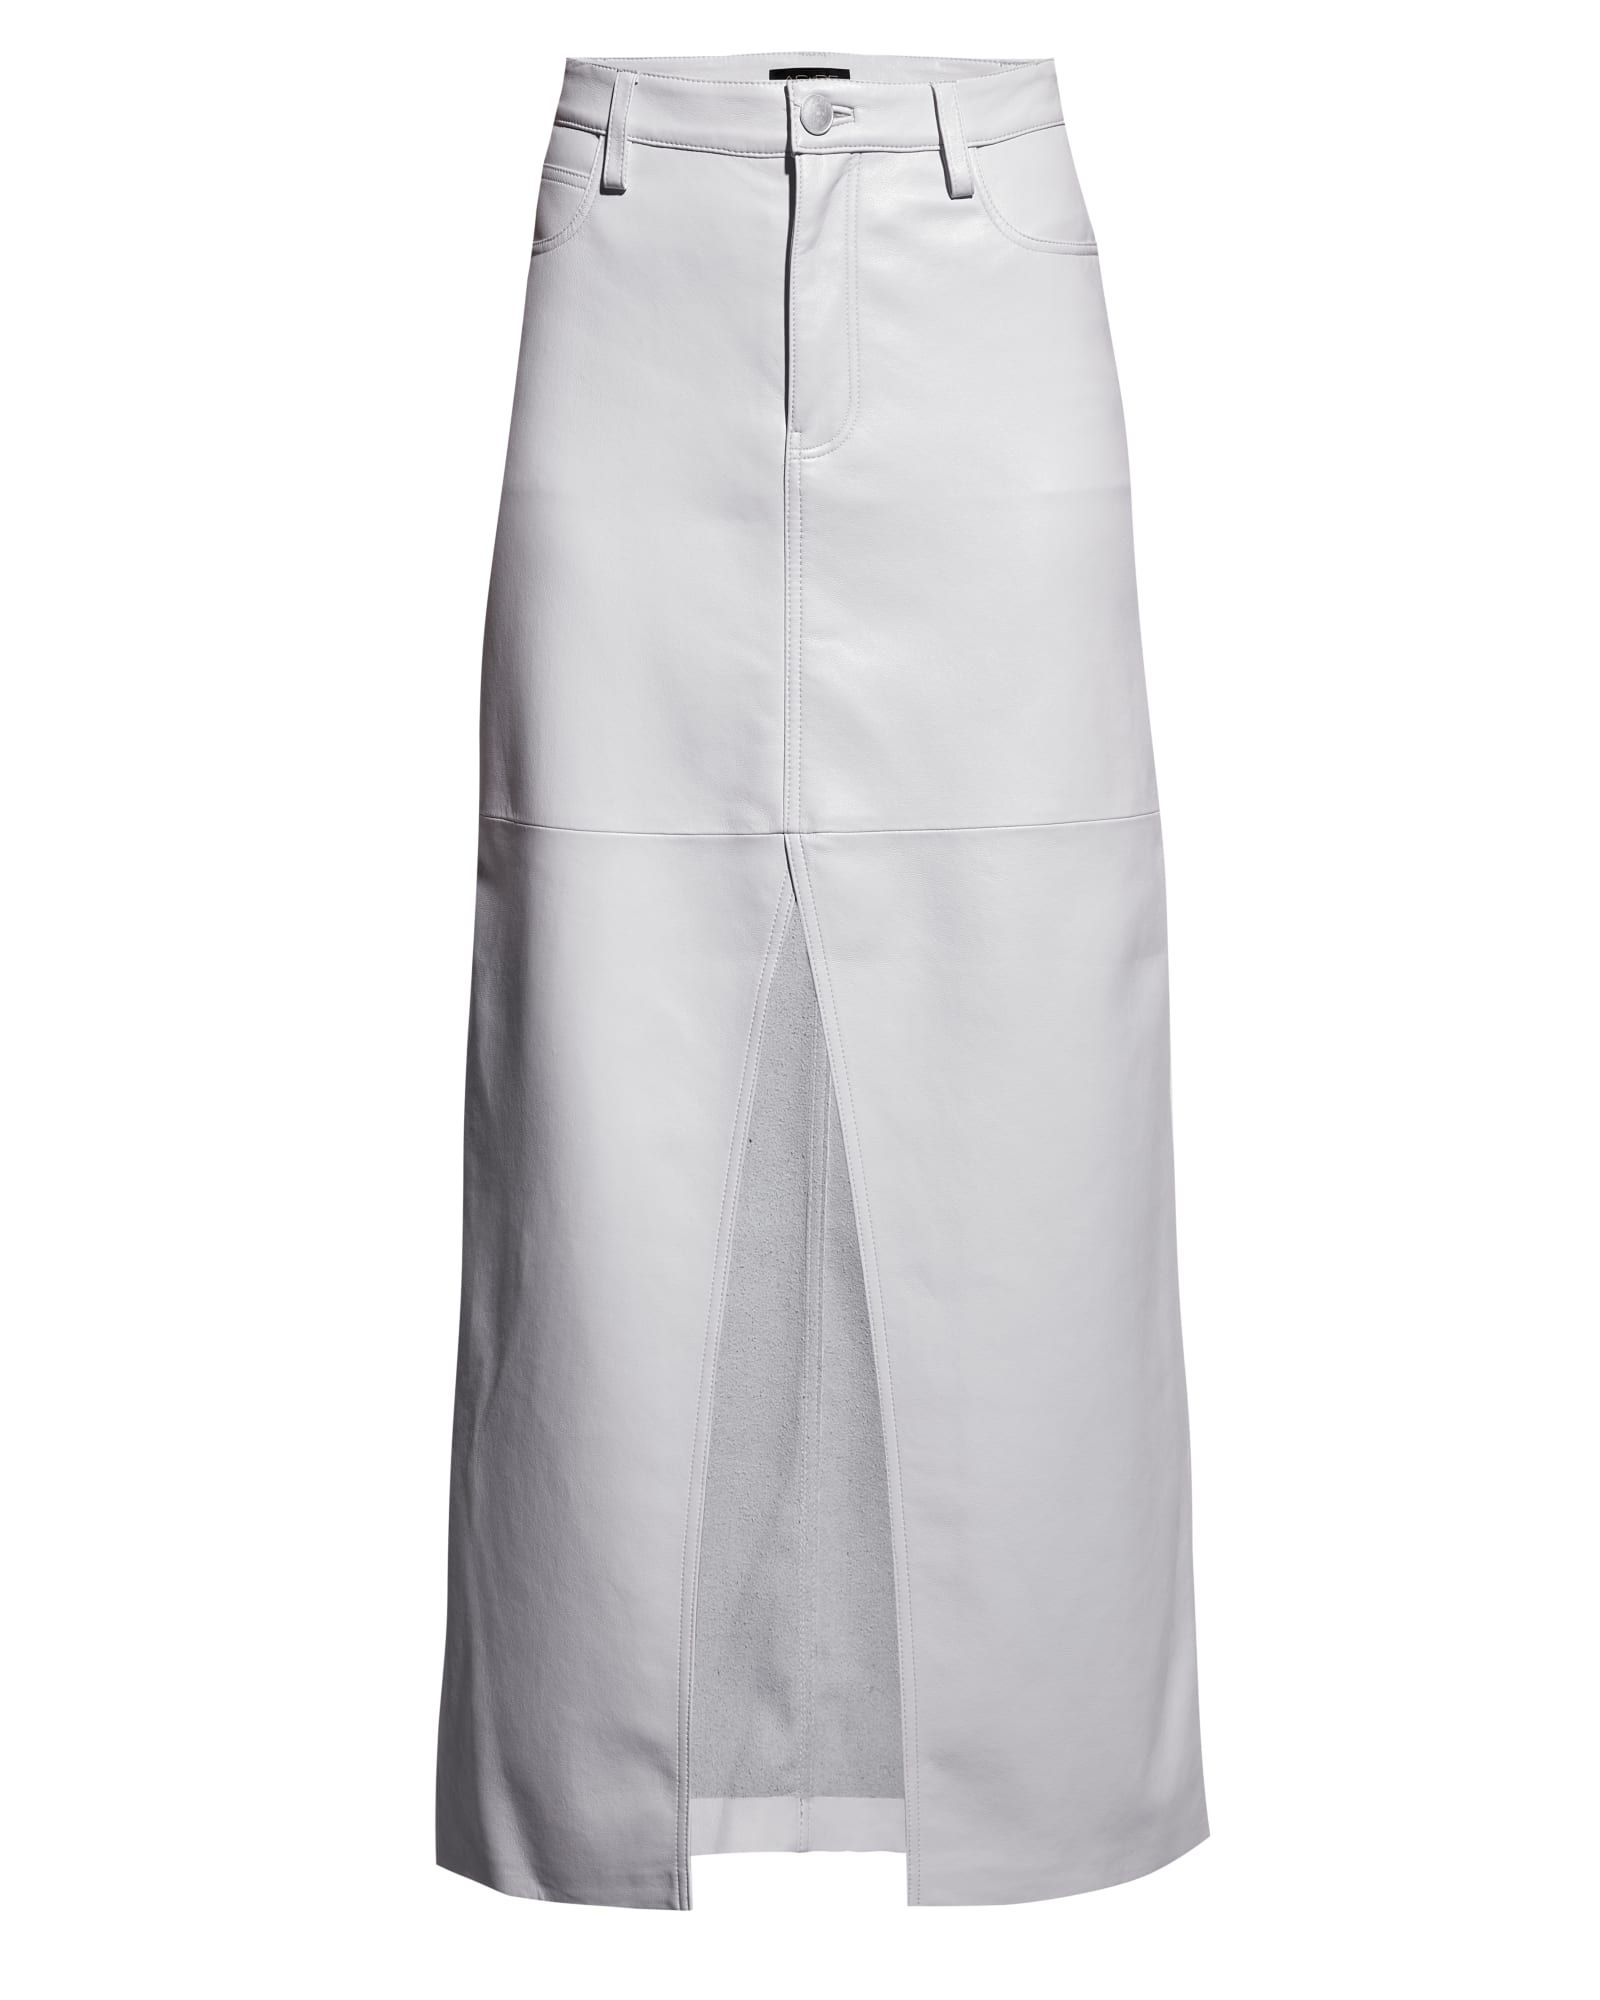 Imogen Recycled Leather Skirt | White